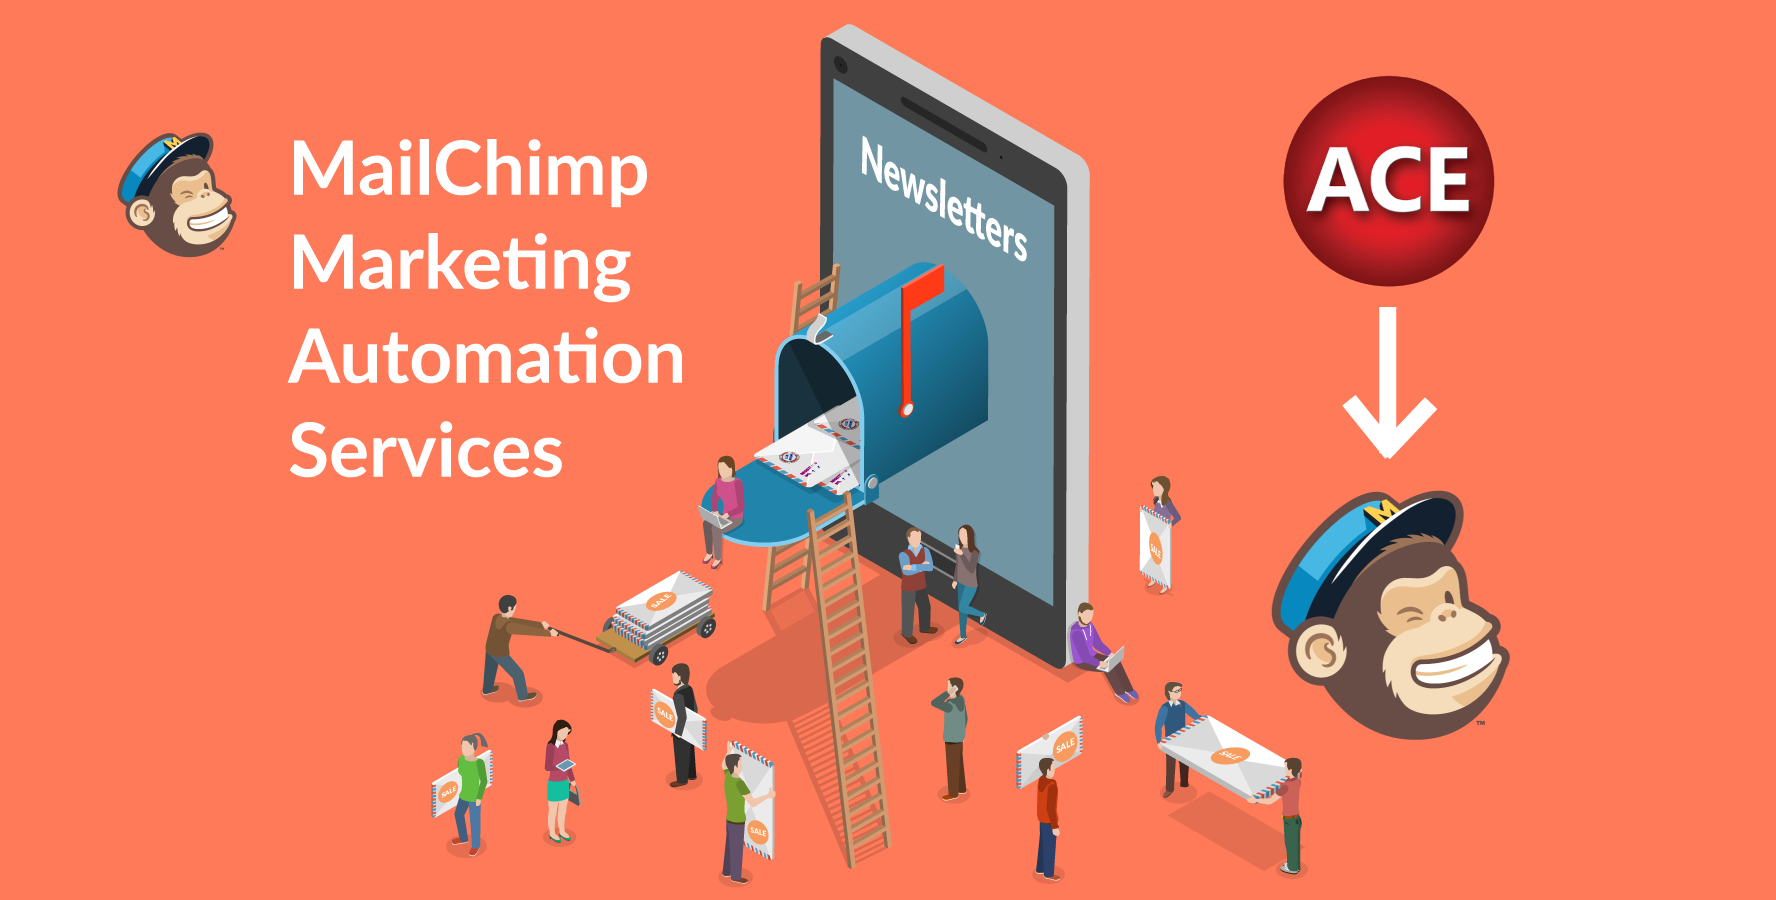 NEW – ACE Retail to MailChimp integration!